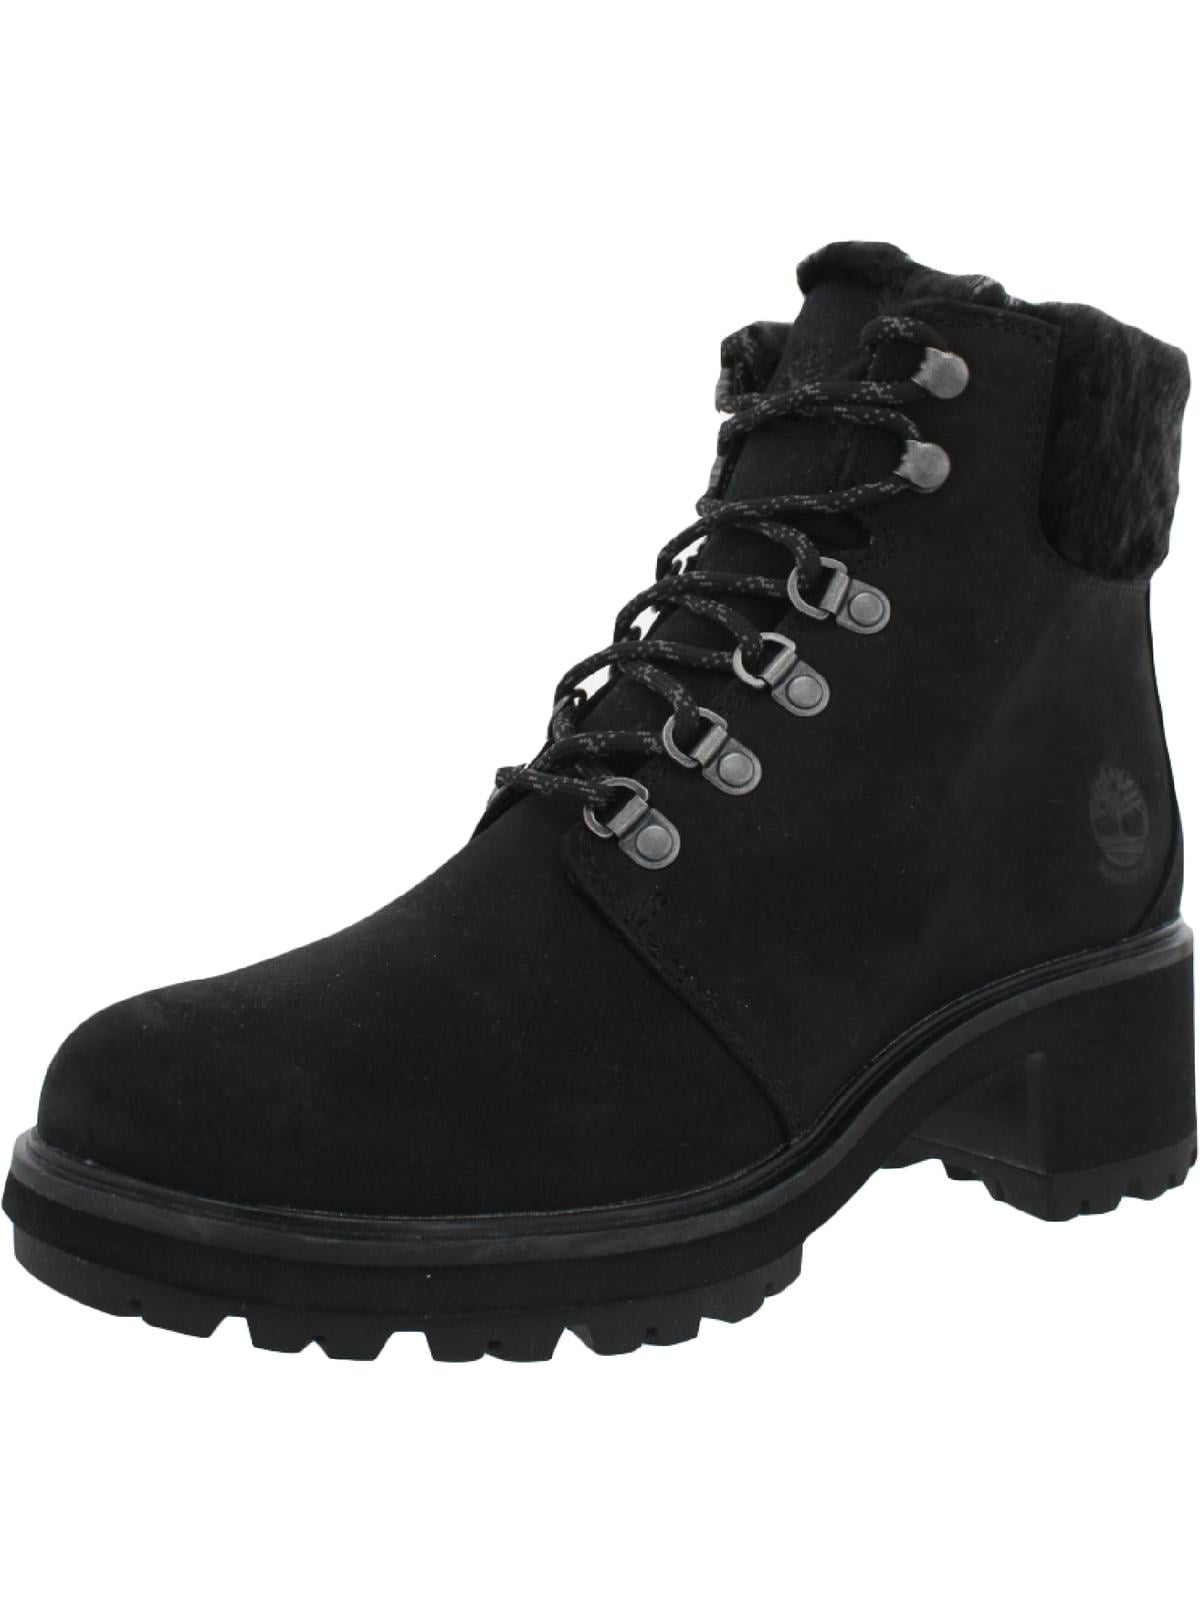 Timberland Womens Kinsley Leather Ankle boot Hiking Boots - Walmart.com